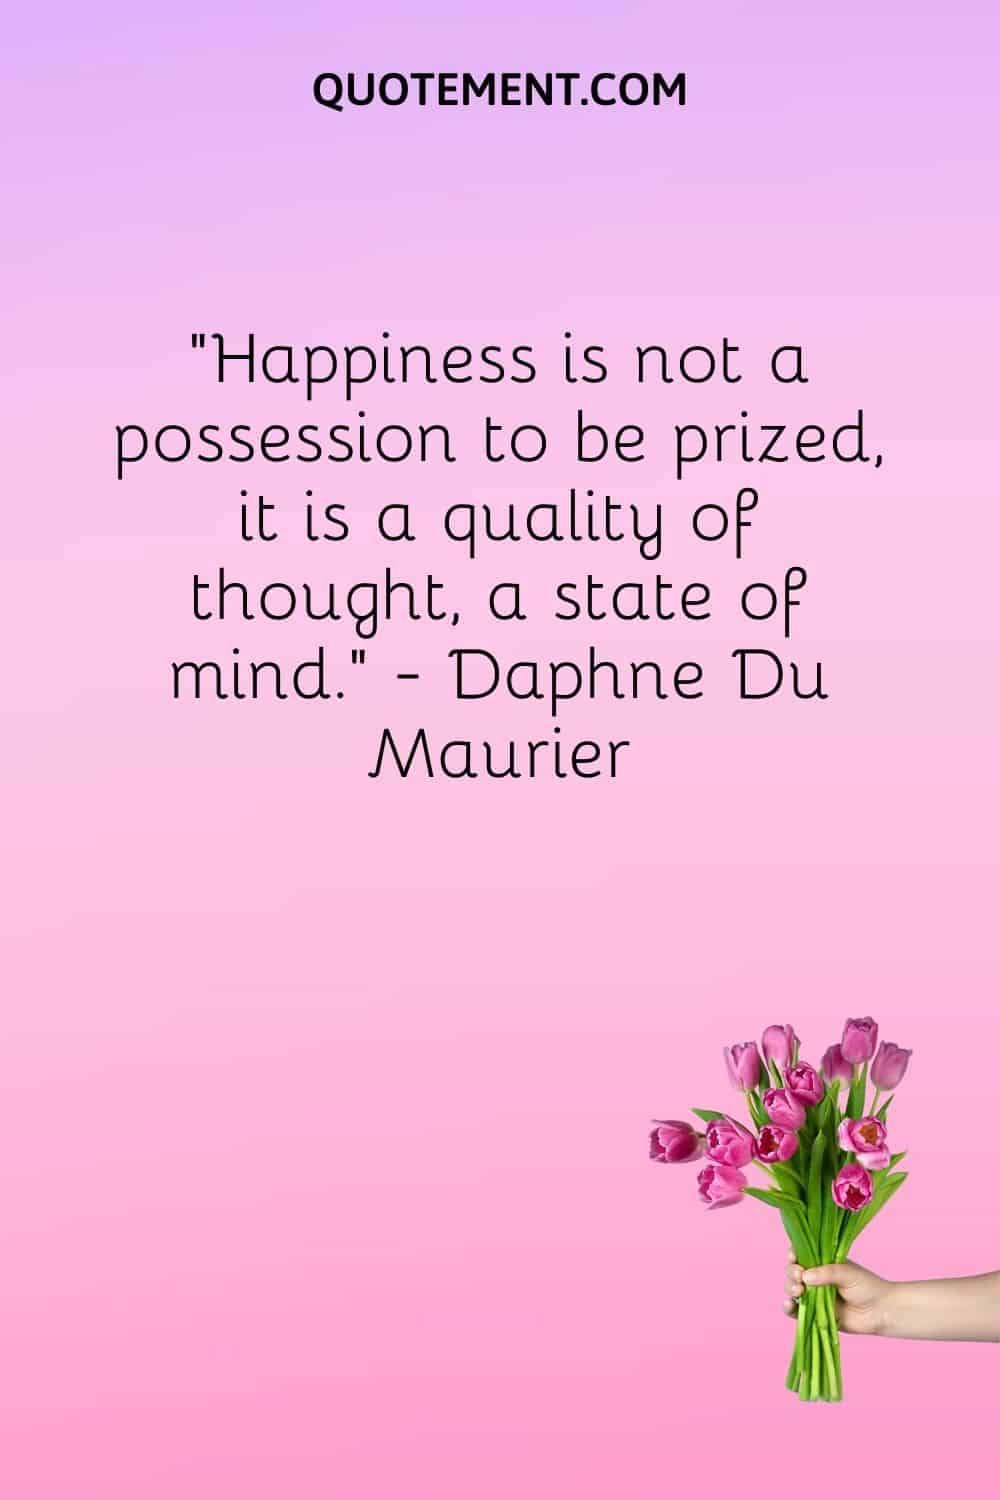 Happiness is not a possession to be prized, it is a quality of thought, a state of mind